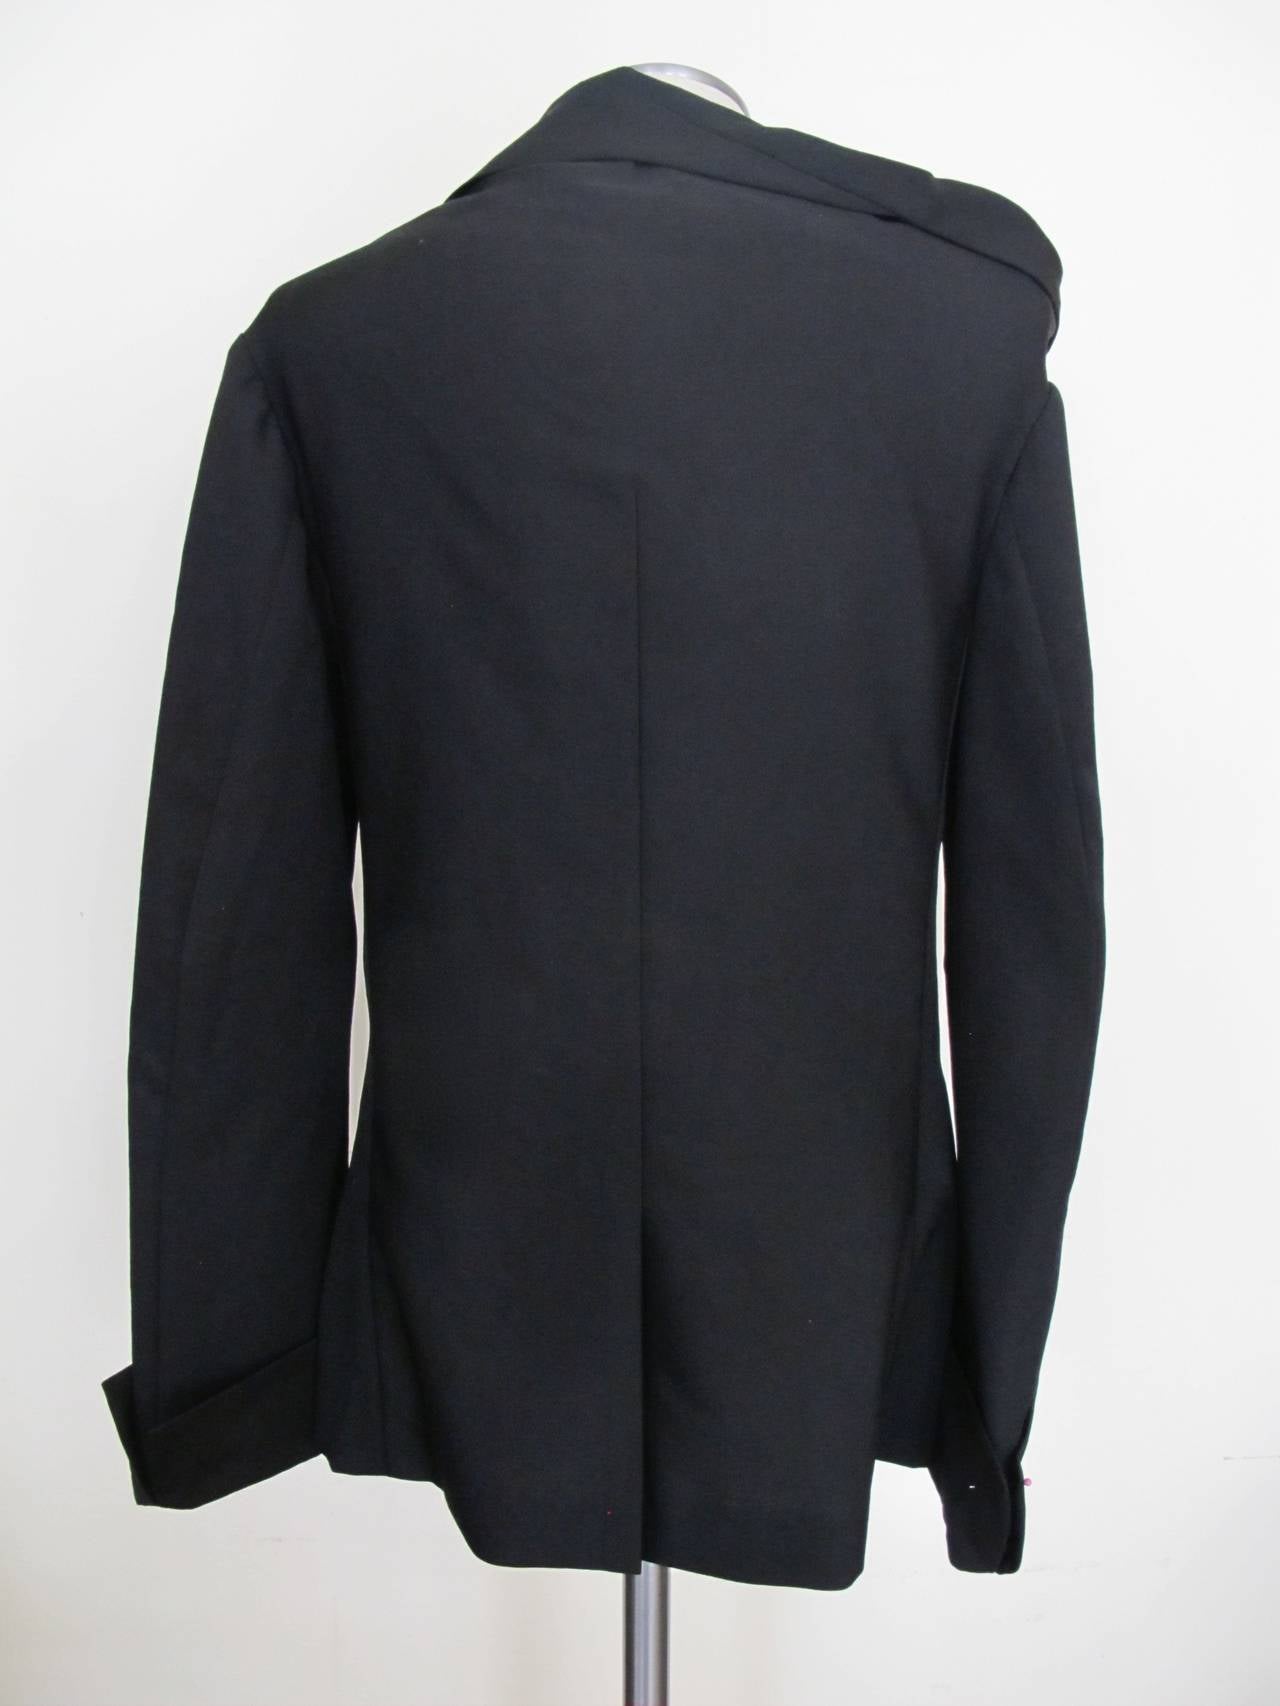 Yohji Yamamoto Black Asymmetrical Jacket In Excellent Condition For Sale In San Francisco, CA